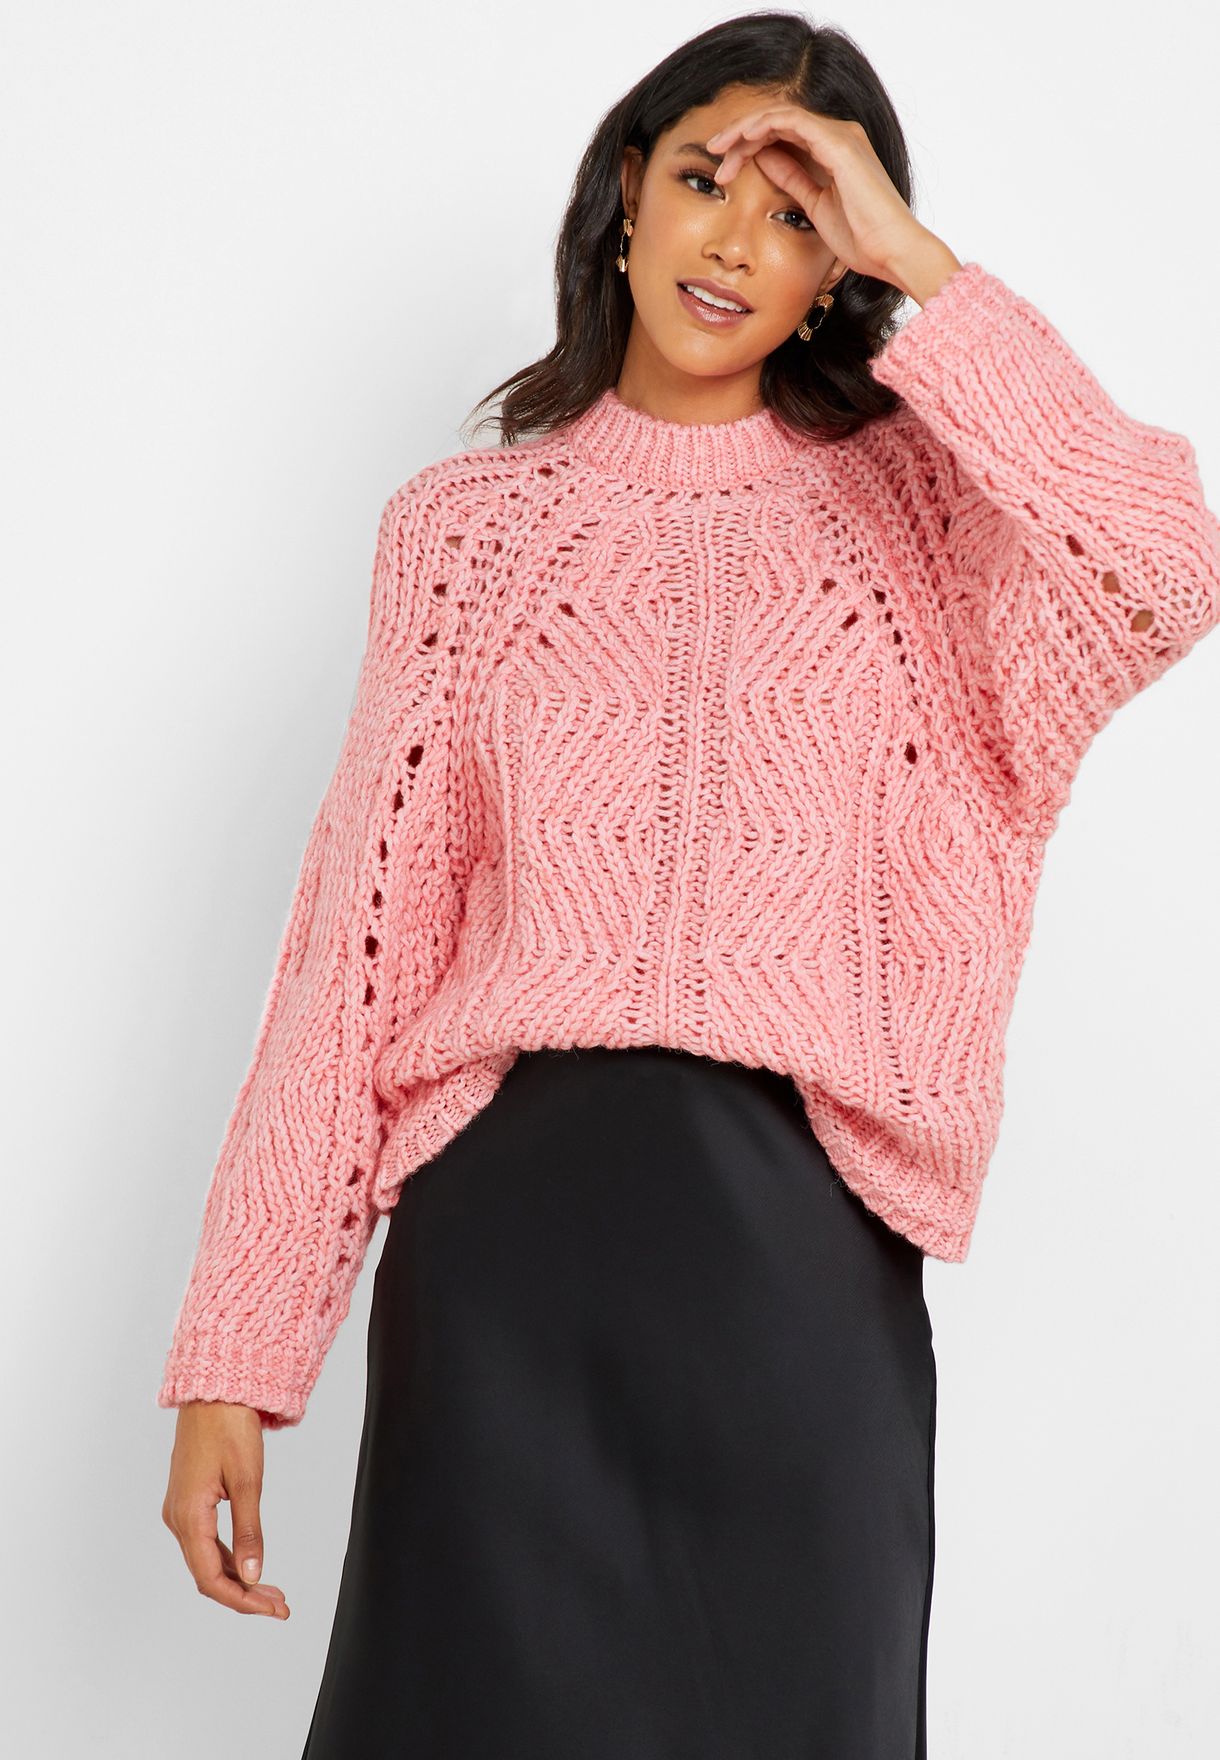 schandaal Claire Iedereen Buy Topshop pink Cable Knit Sweater for Women in MENA, Worldwide